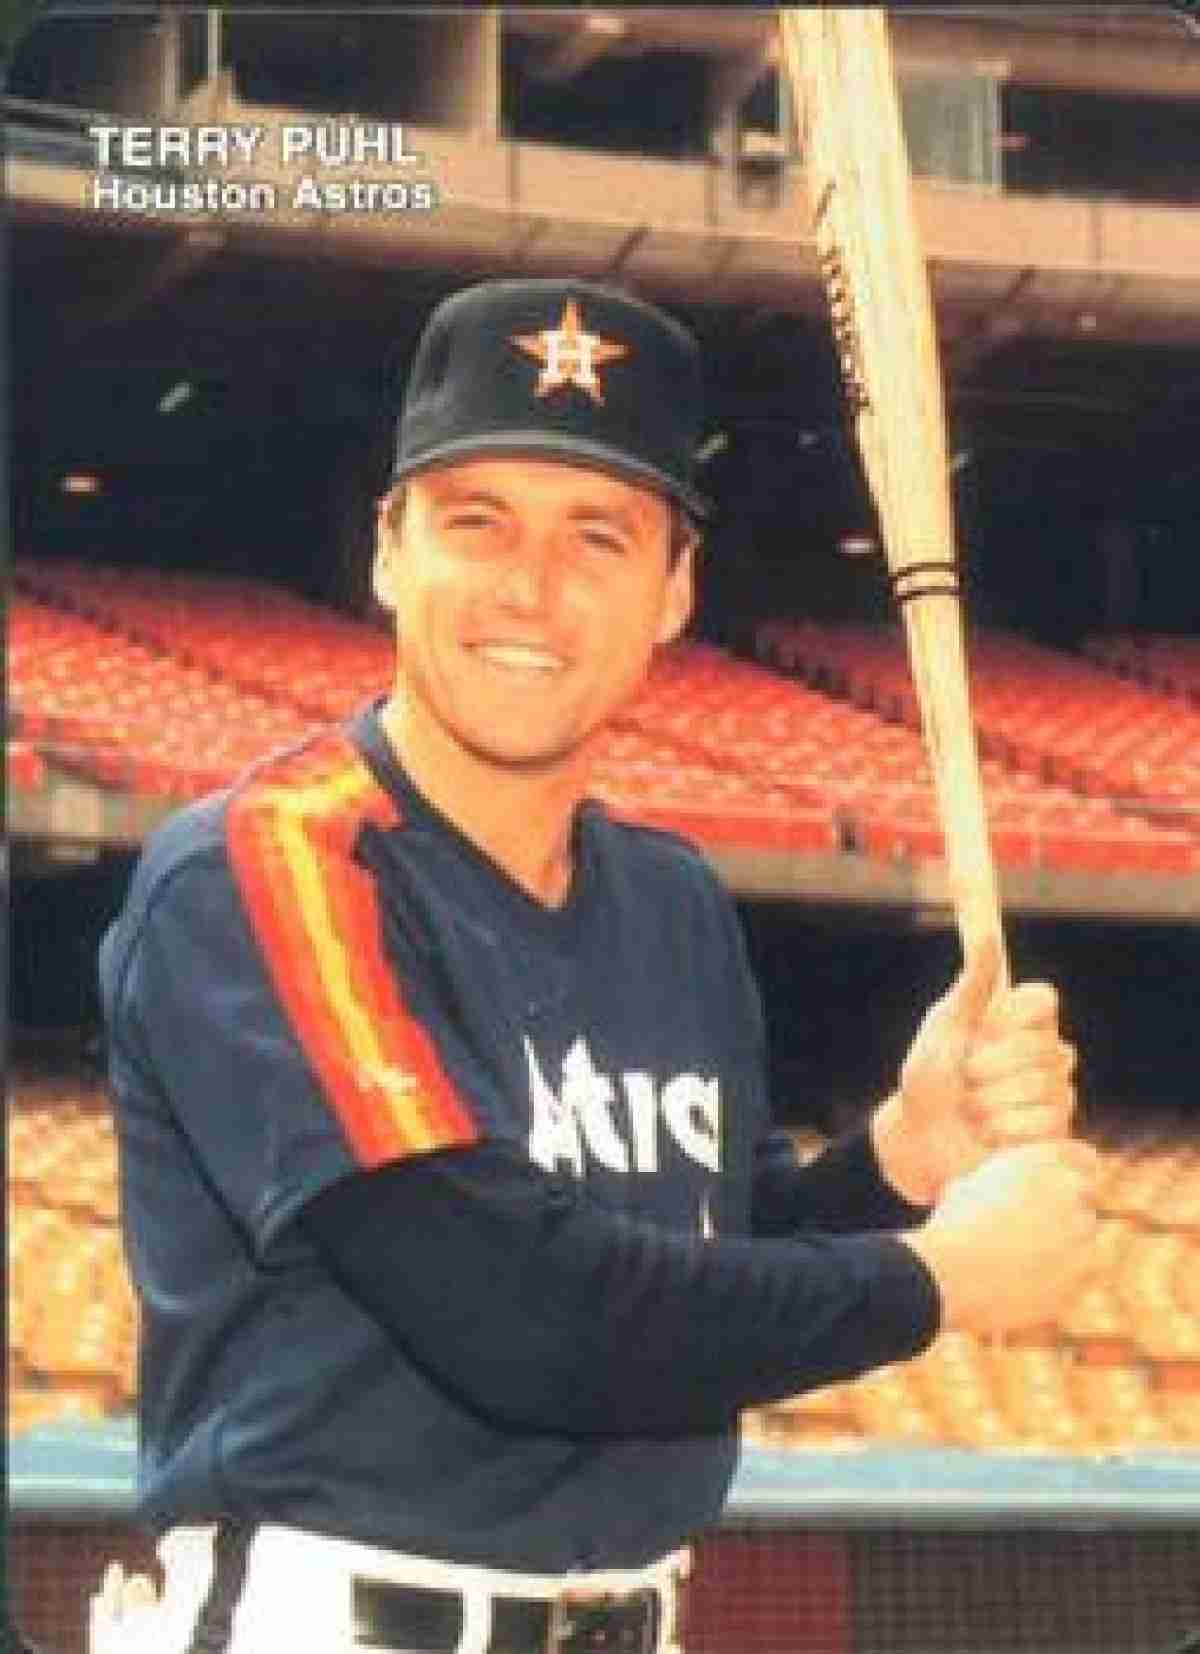 Former UHV coach Terry Puhl inducted into Astros Hall of Fame